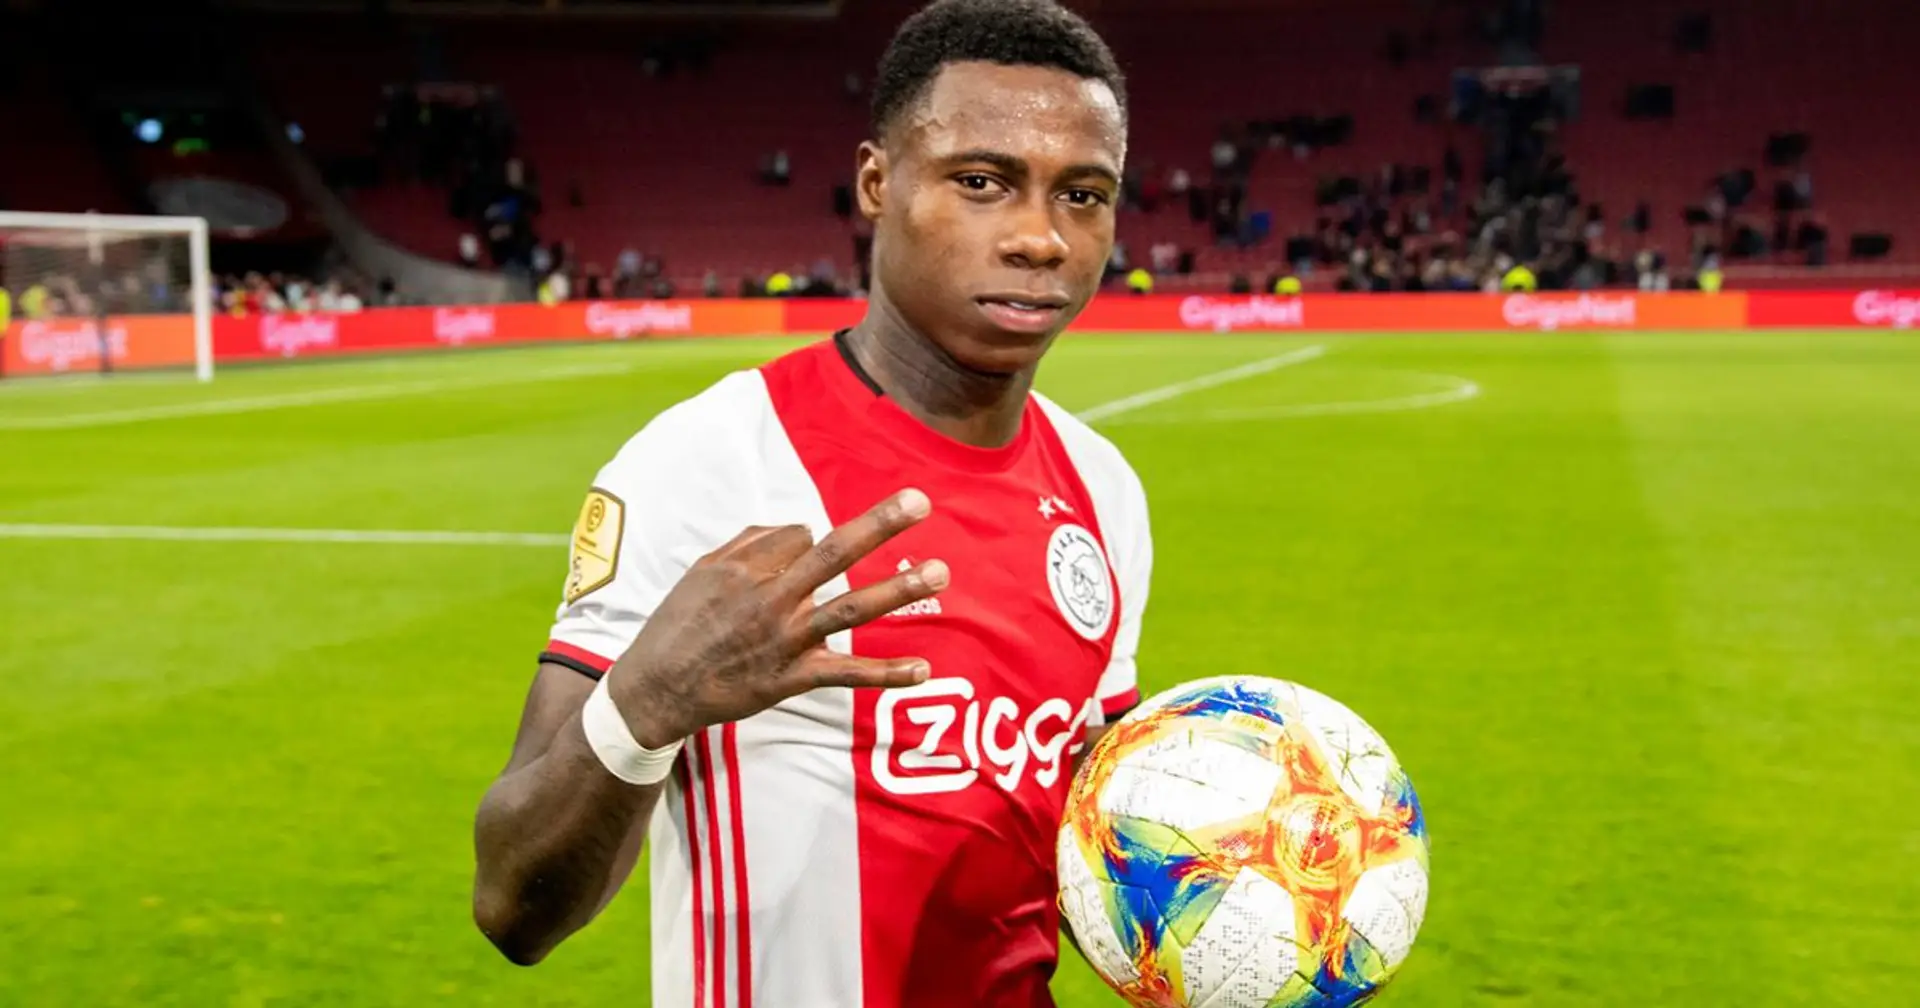 Quincy Promes to Arsenal for £25m? 2 PROs and 3 CONs of this deal